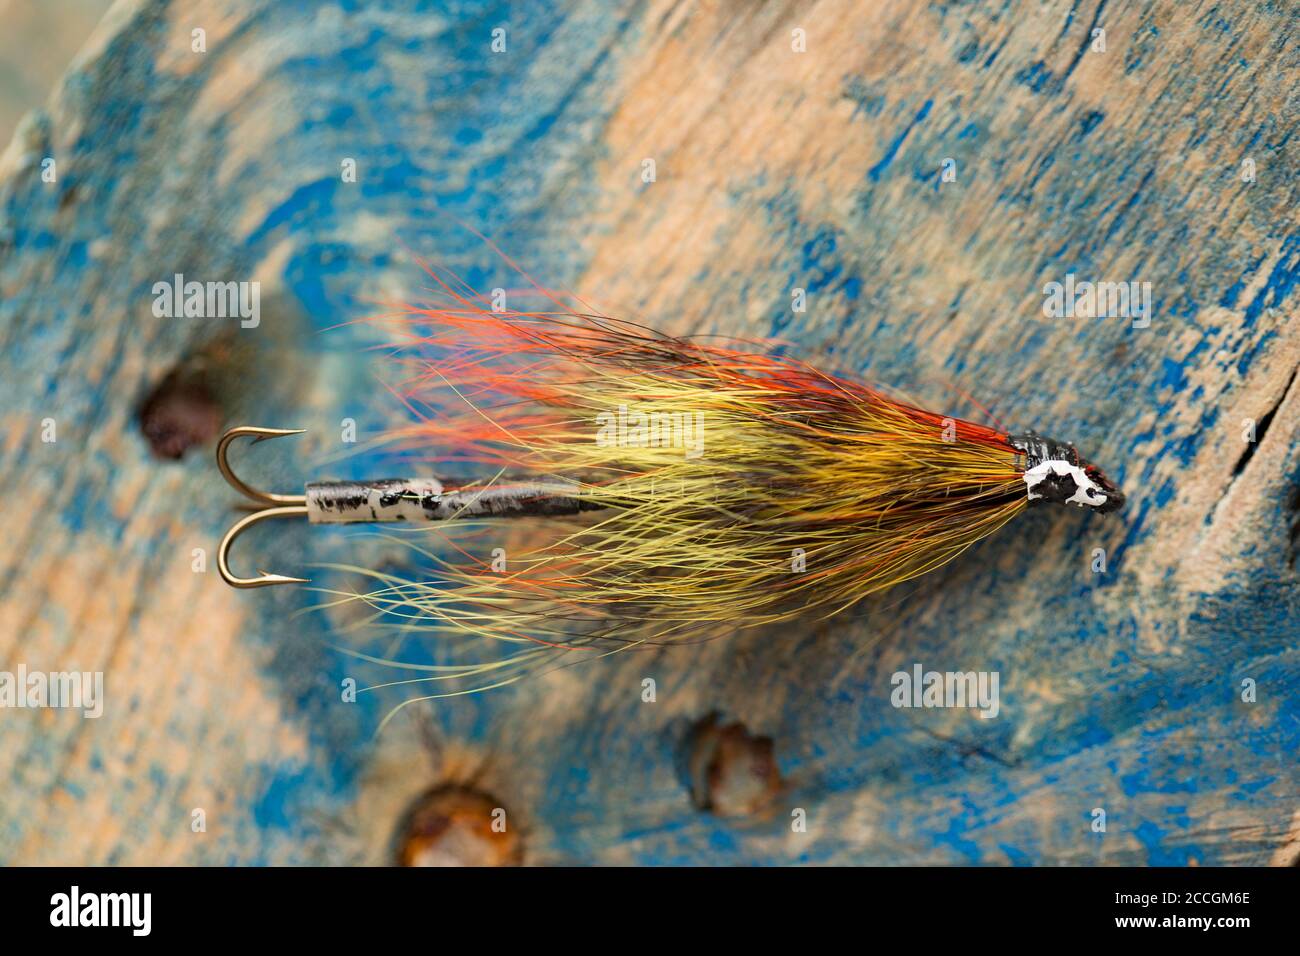 An old salmon fly equipped with a treble hook taken from a fly box